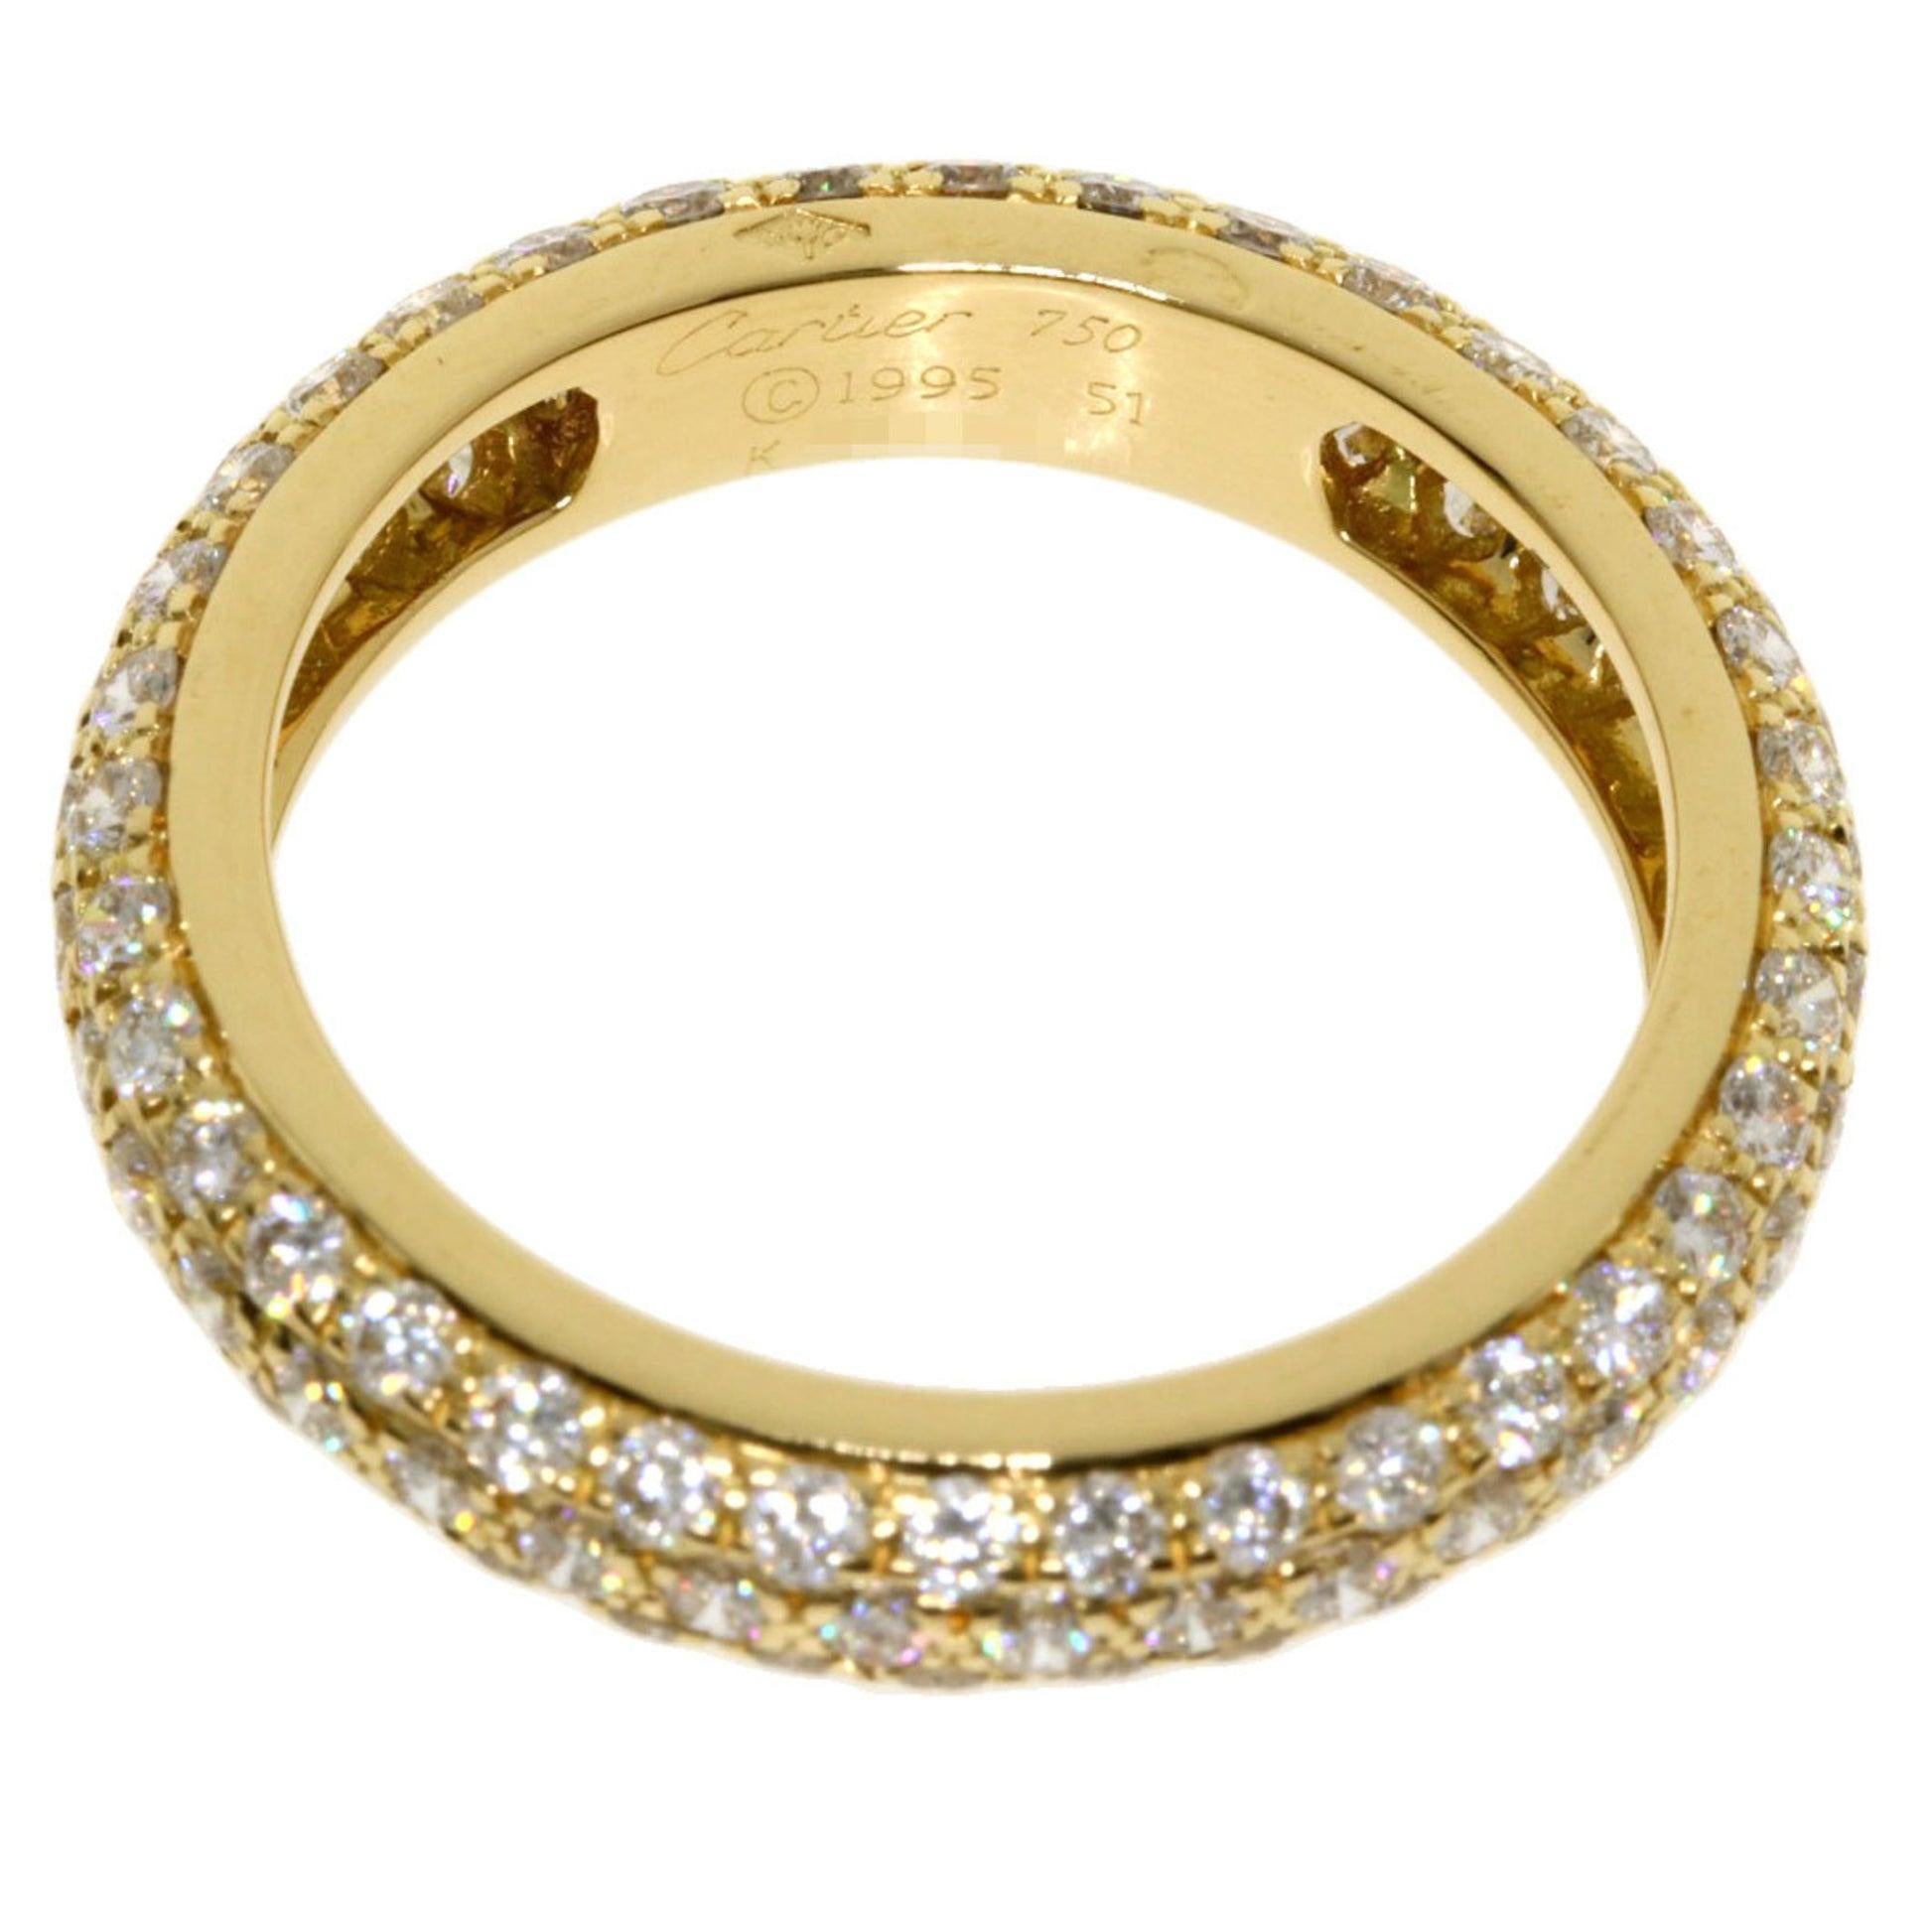 Cartier Pave Eternity Full Diamond Ring in 18K Yellow Gold For Sale 1